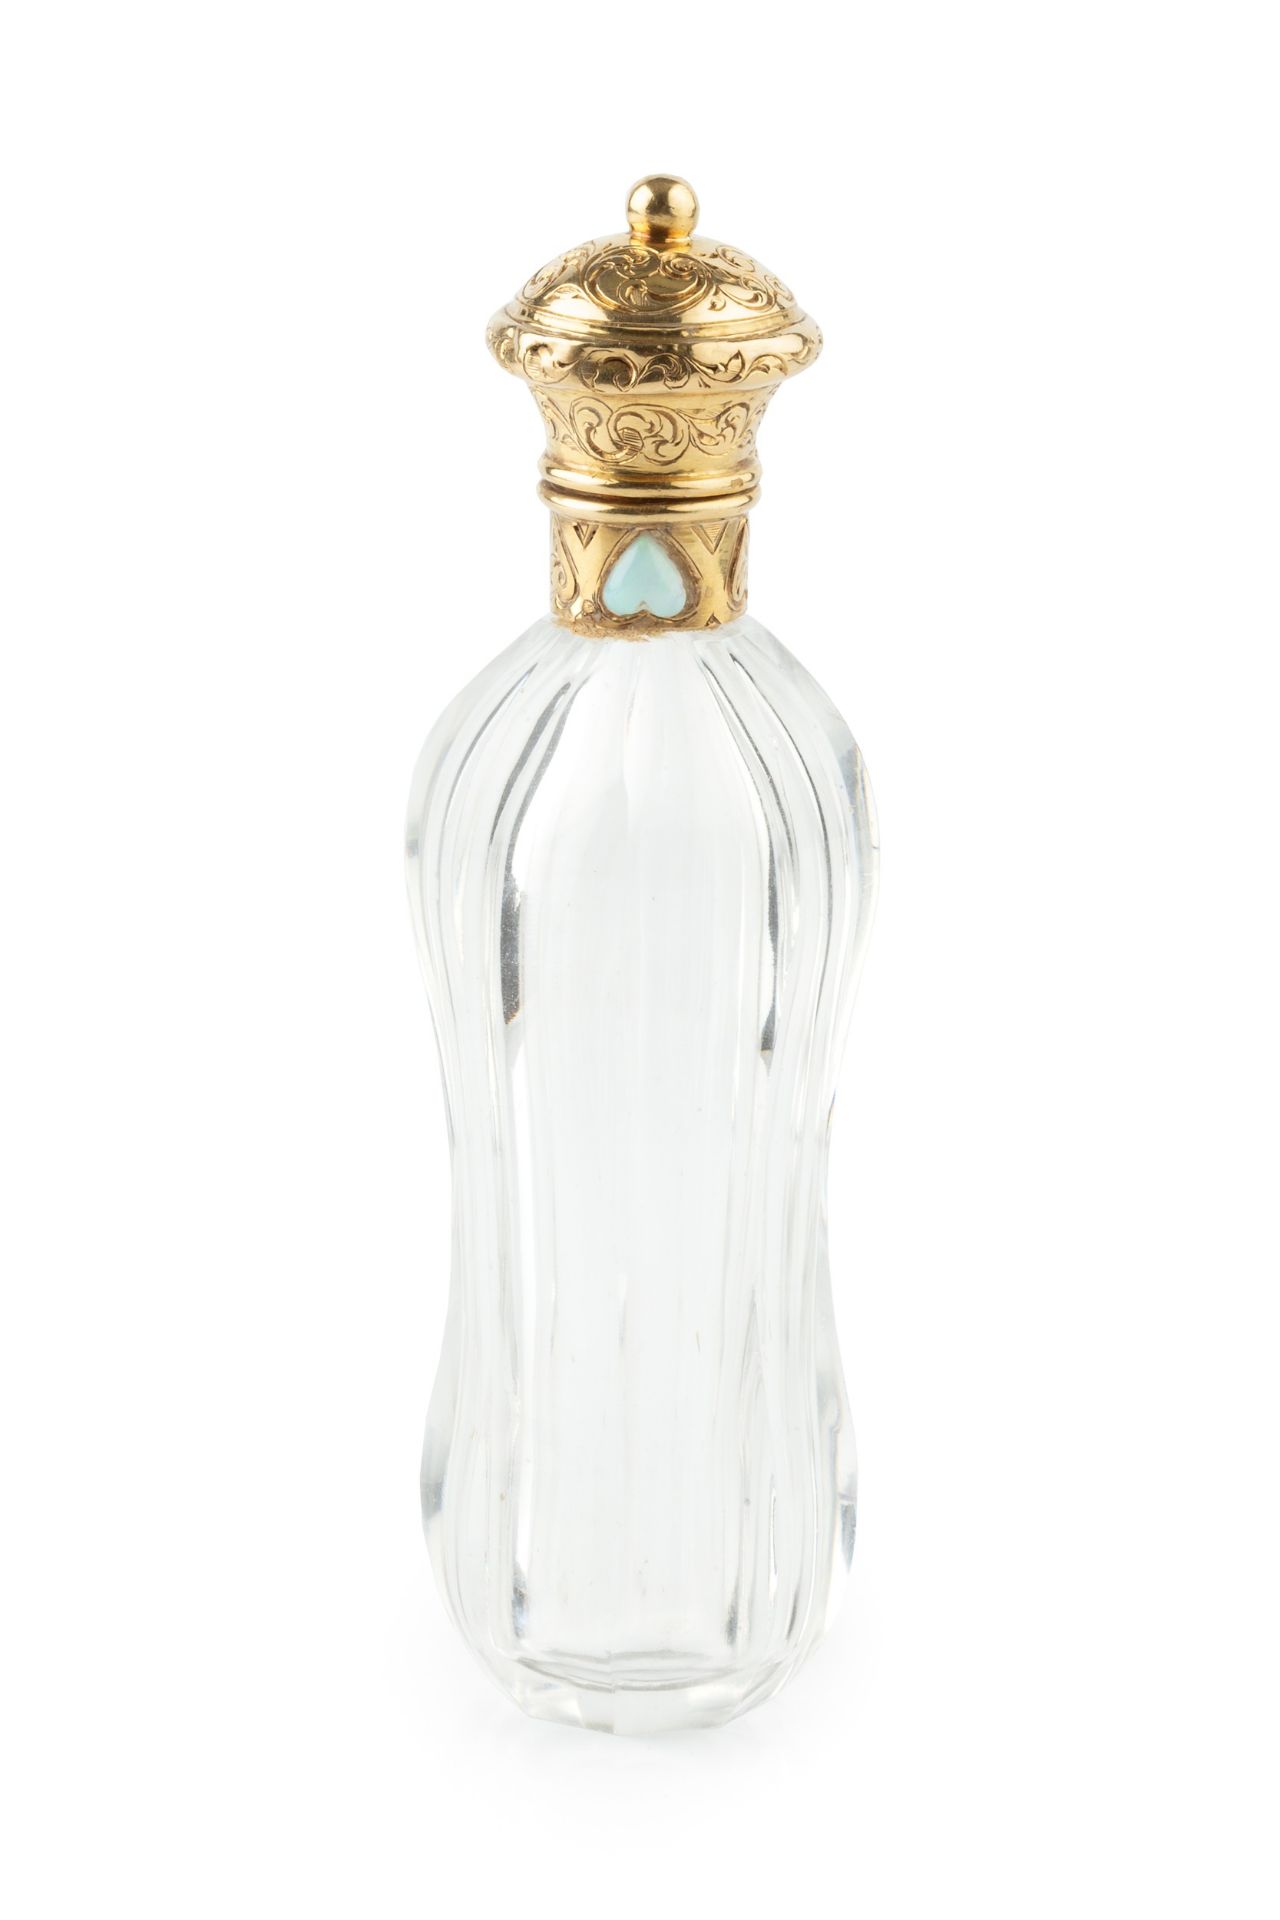 A 19th century French gold mounted glass scent bottle, of waisted and faceted form, the hinged cover